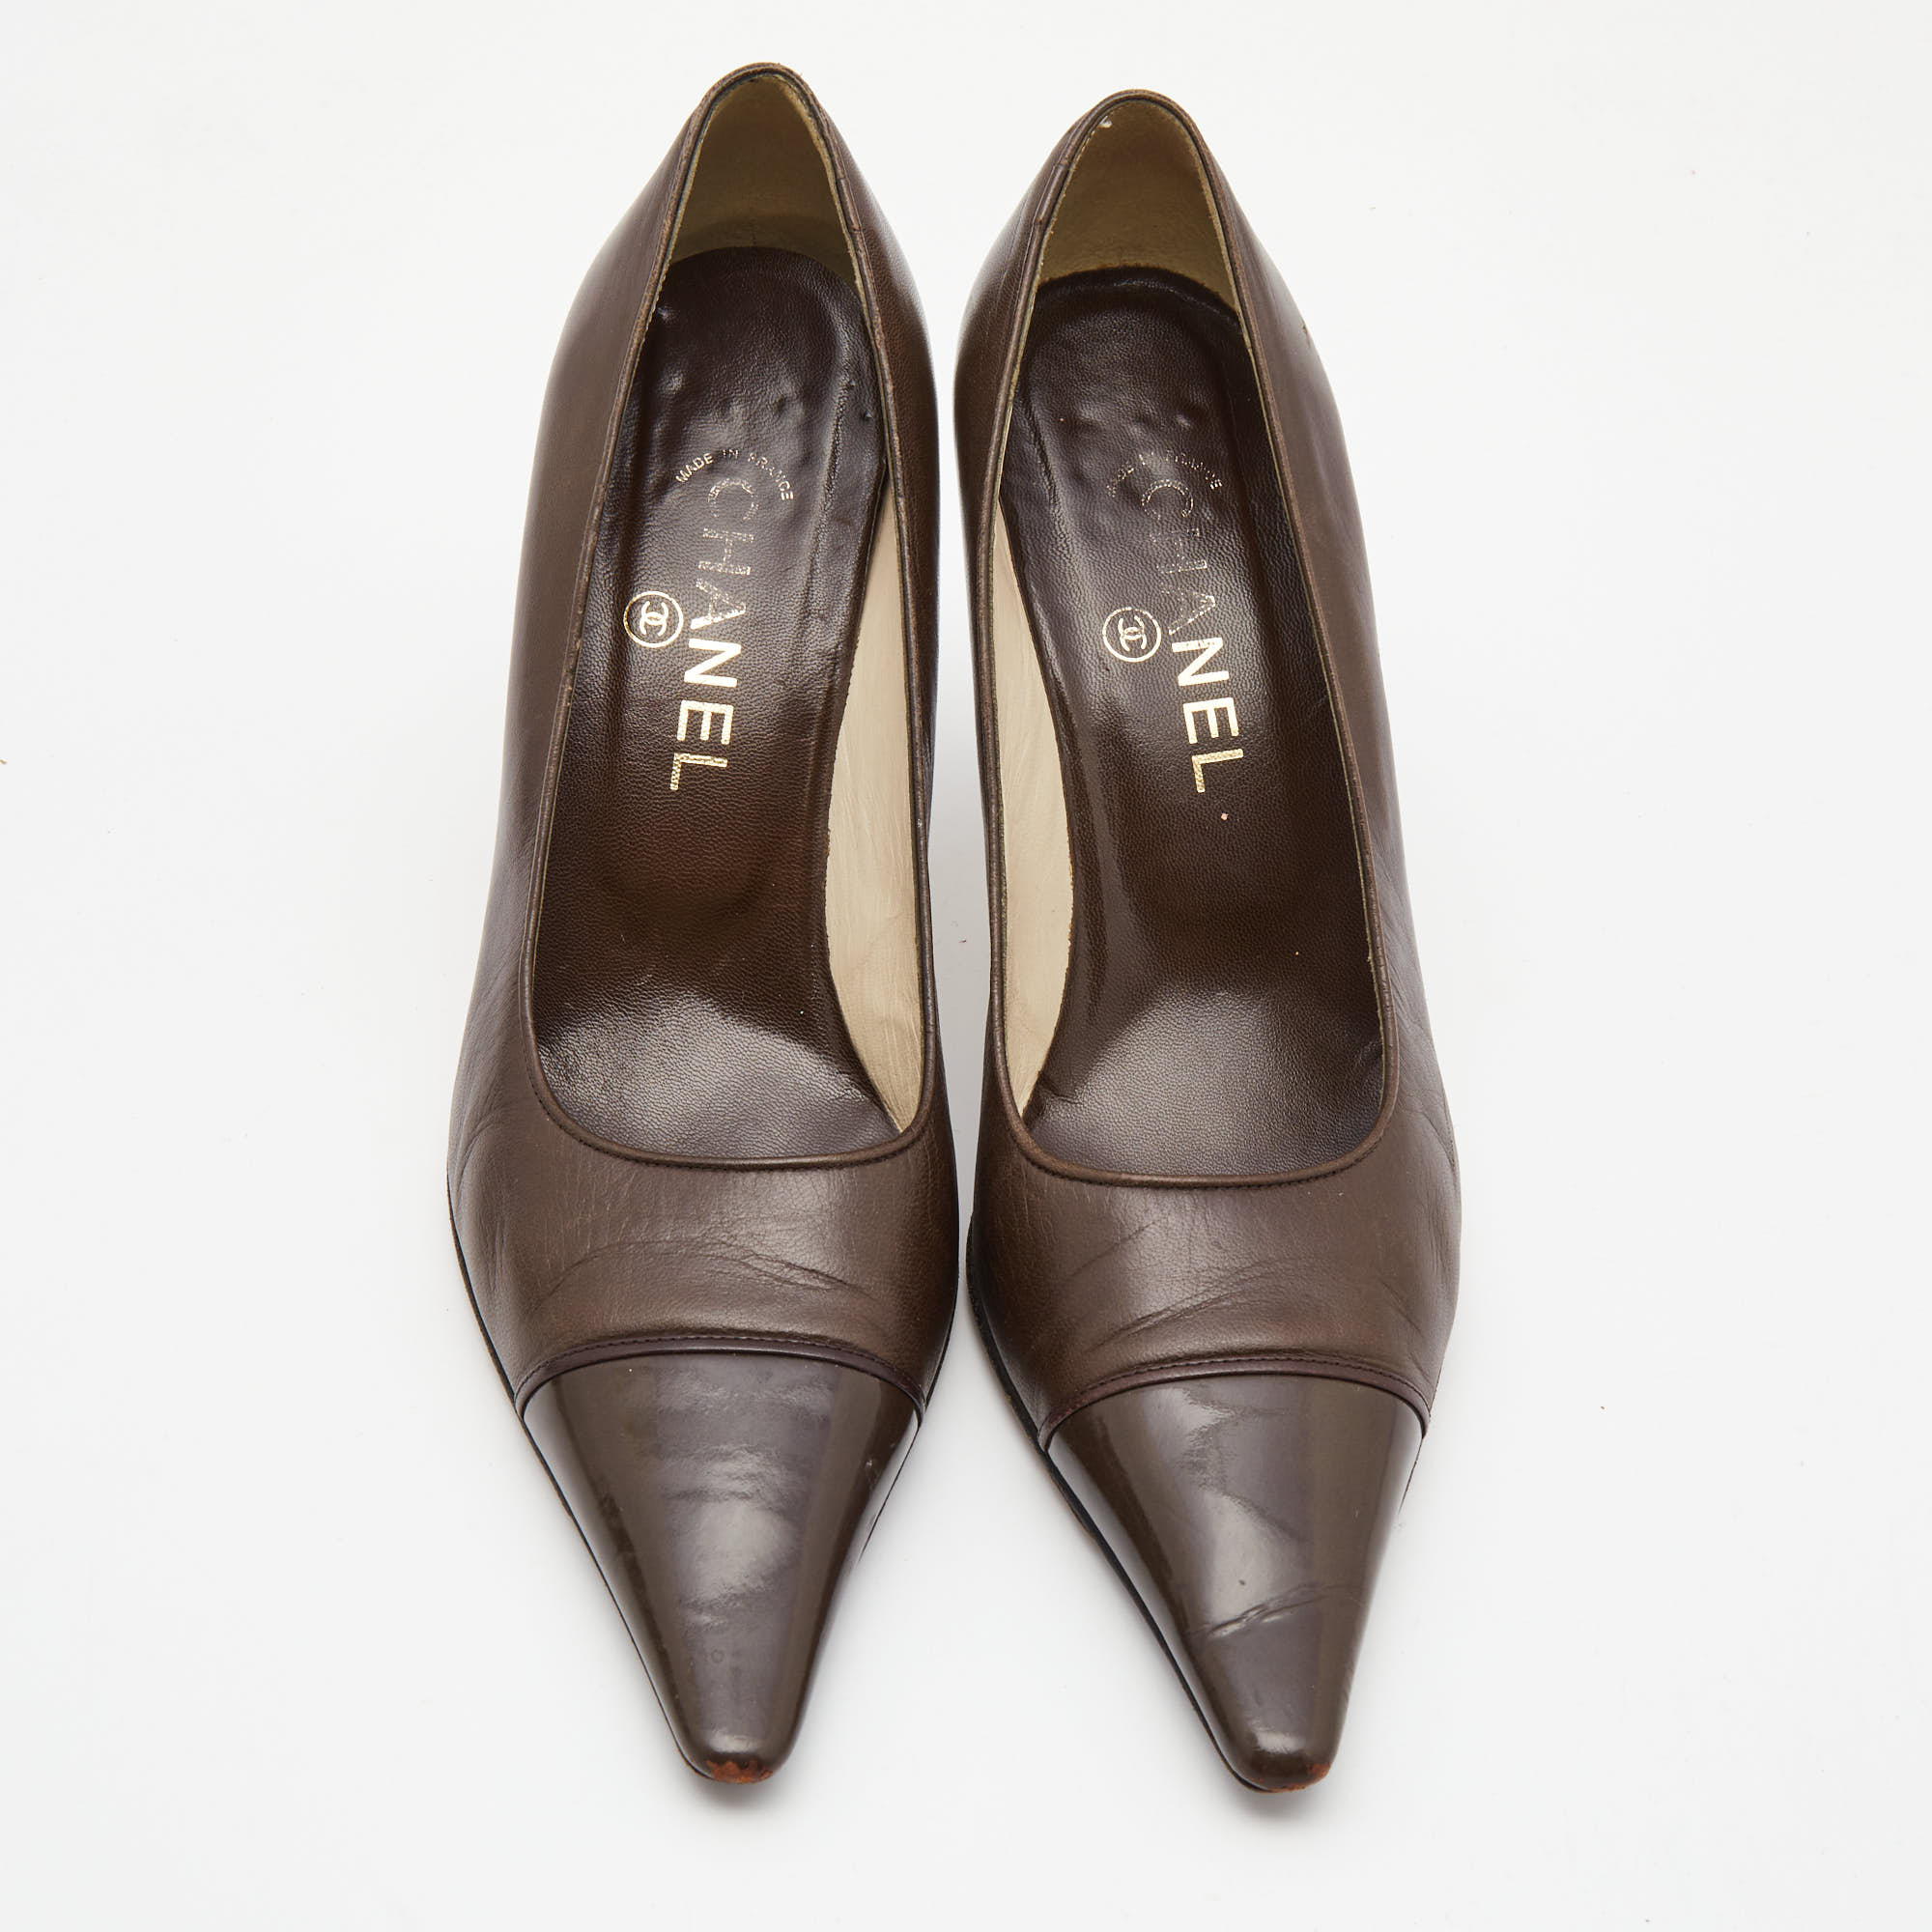 Chanel Brown Leather Pointed Cap Toe Pumps Size 38.5